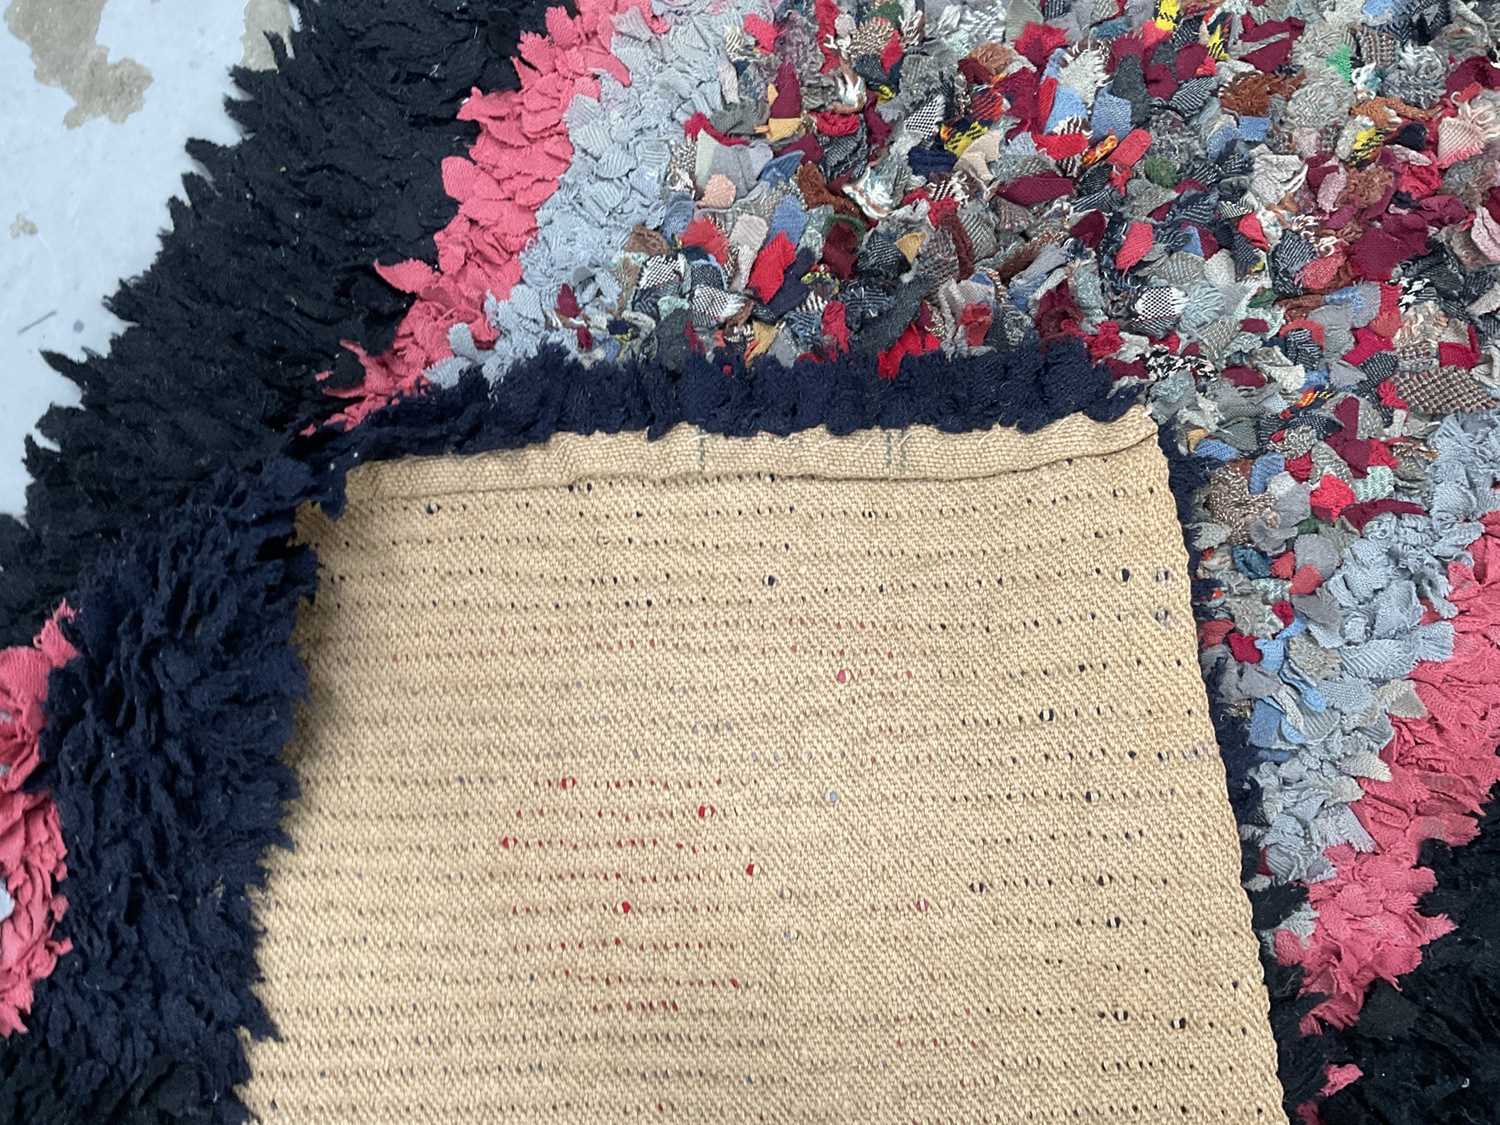 Rag rug with abstract design, 160 x 70cm - Image 3 of 3